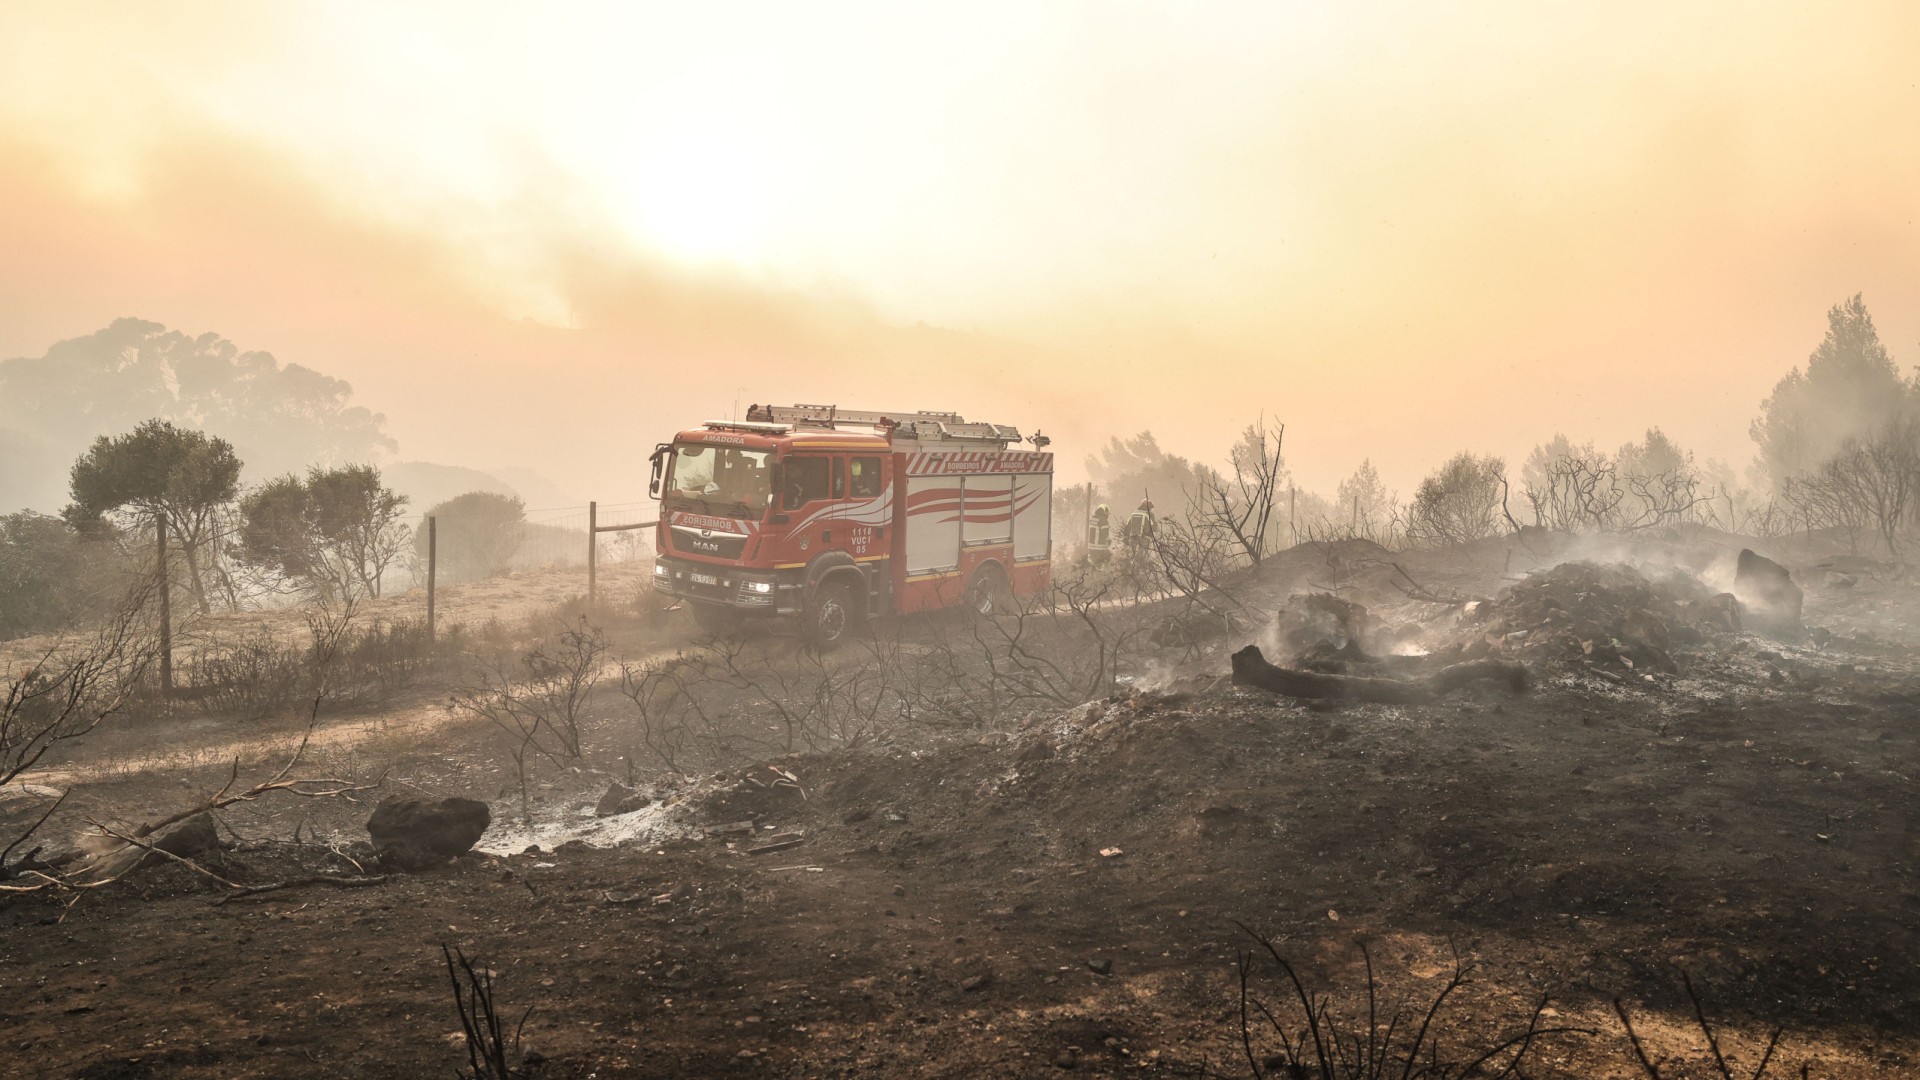 Croatia is Burning. Hundreads of Firefighters Are Battling the 12 km Disaster. image 32